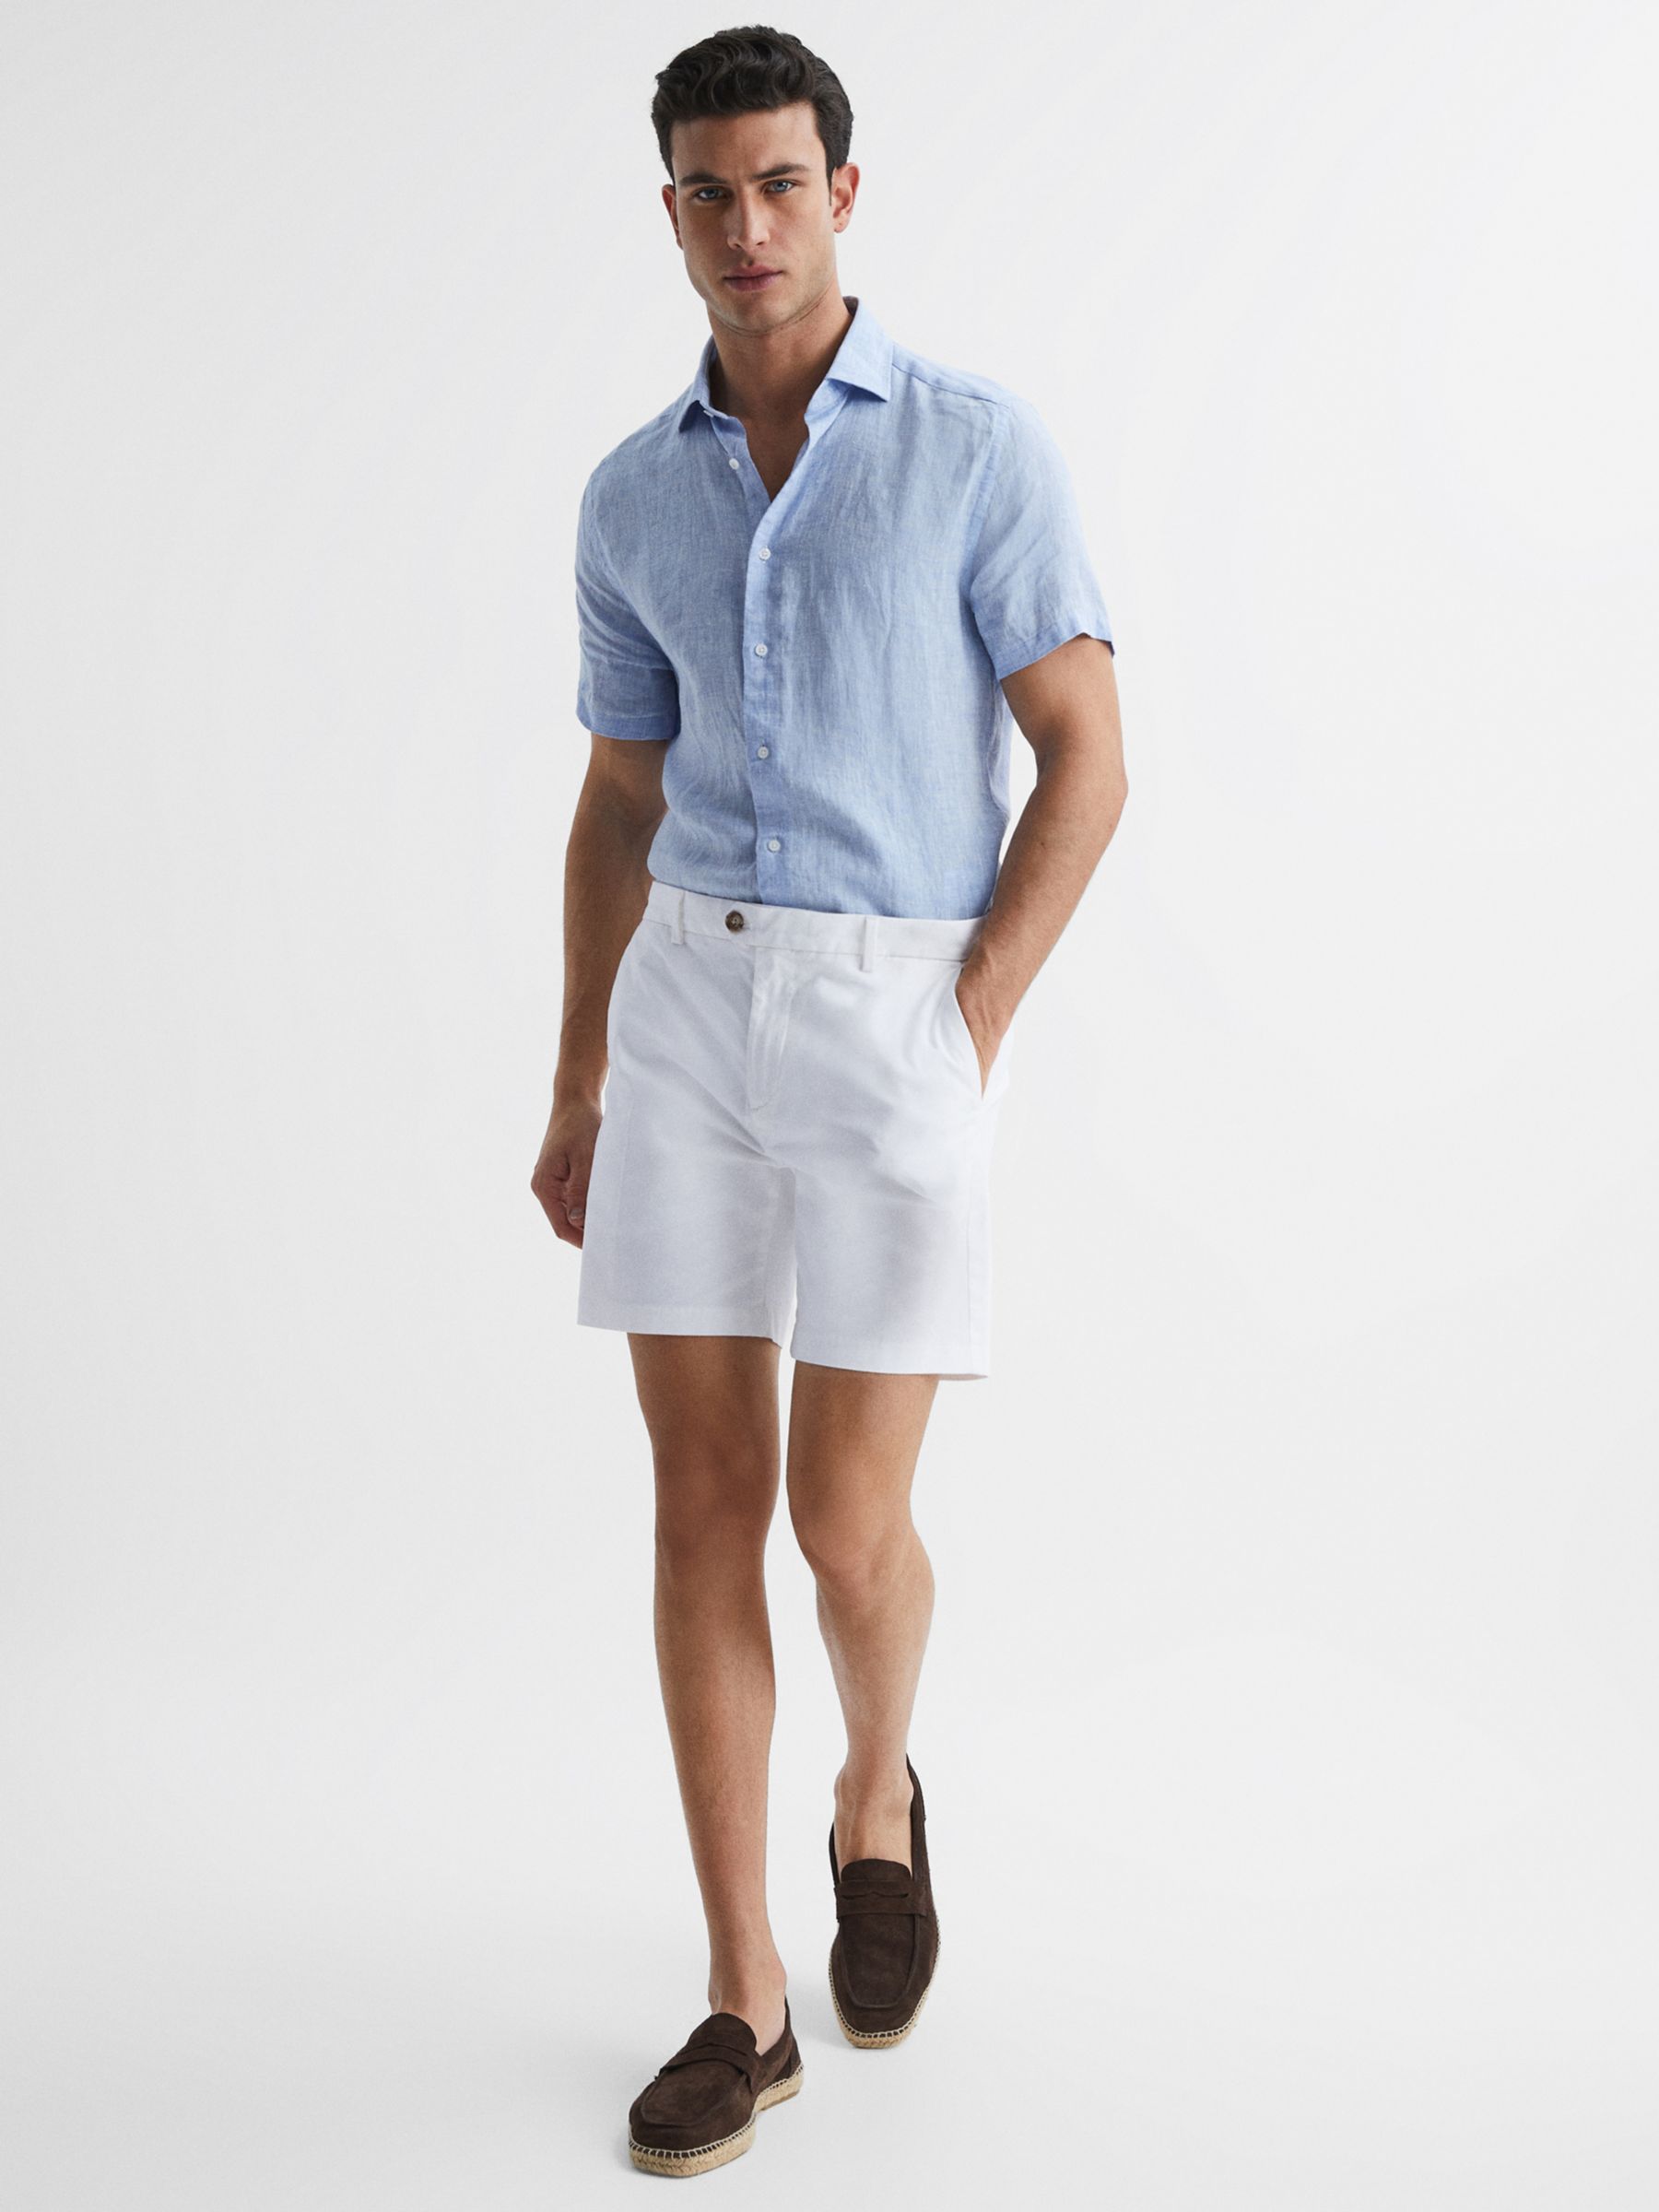 Reiss Wicket Casual Chino Shorts, White, 28R